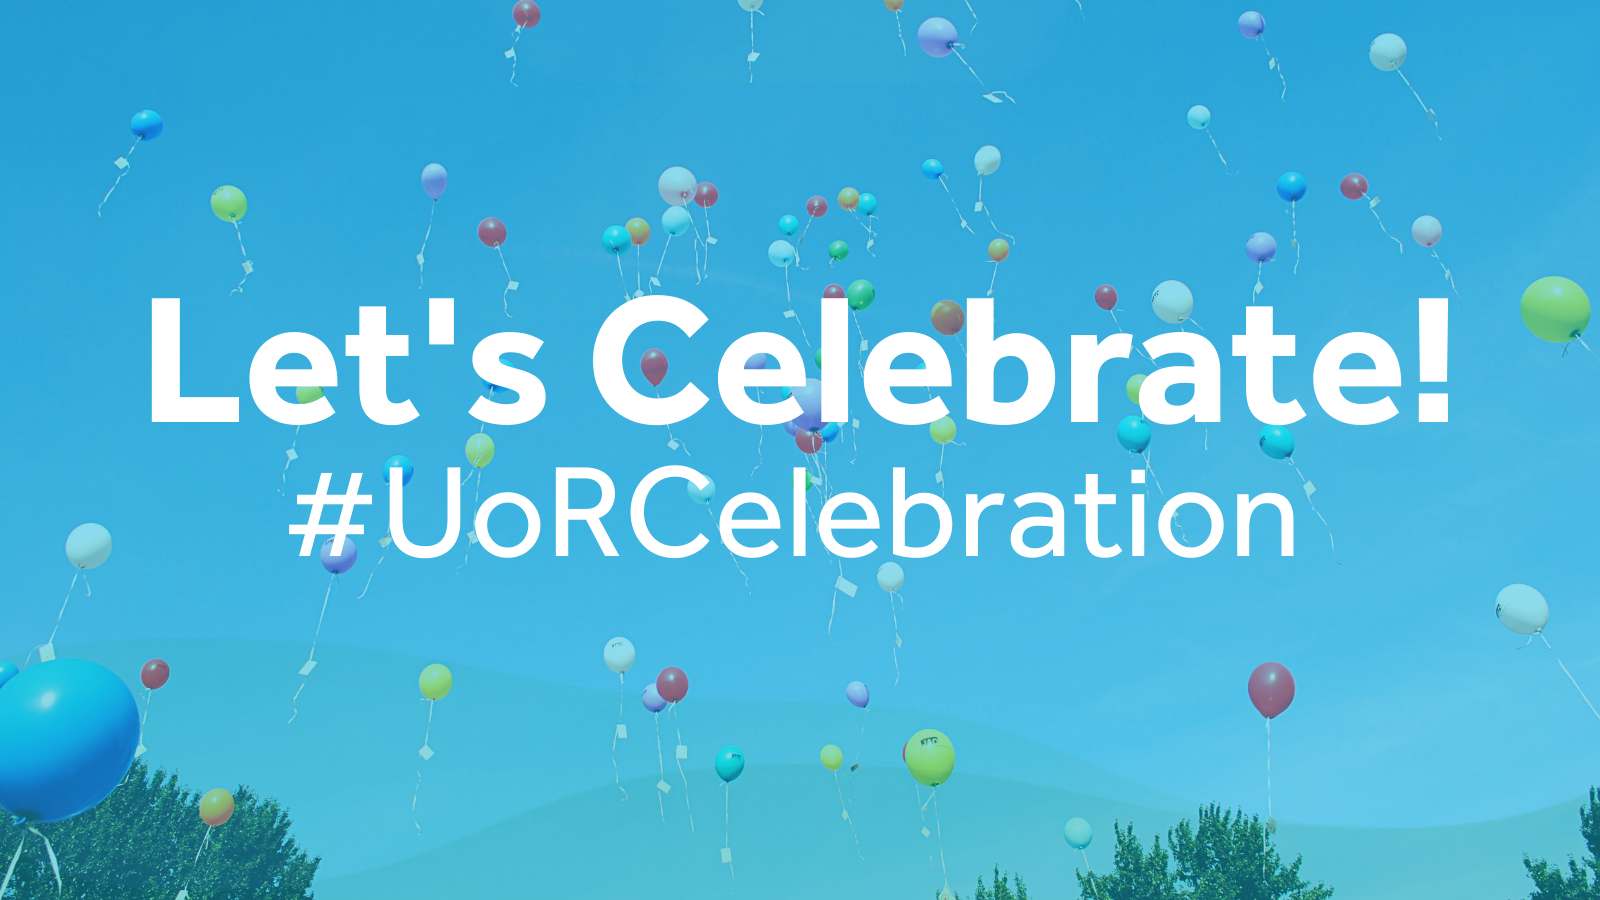 Photograph of balloons in the sky. Text in white: Let's Celebrate! #UoRCelebration